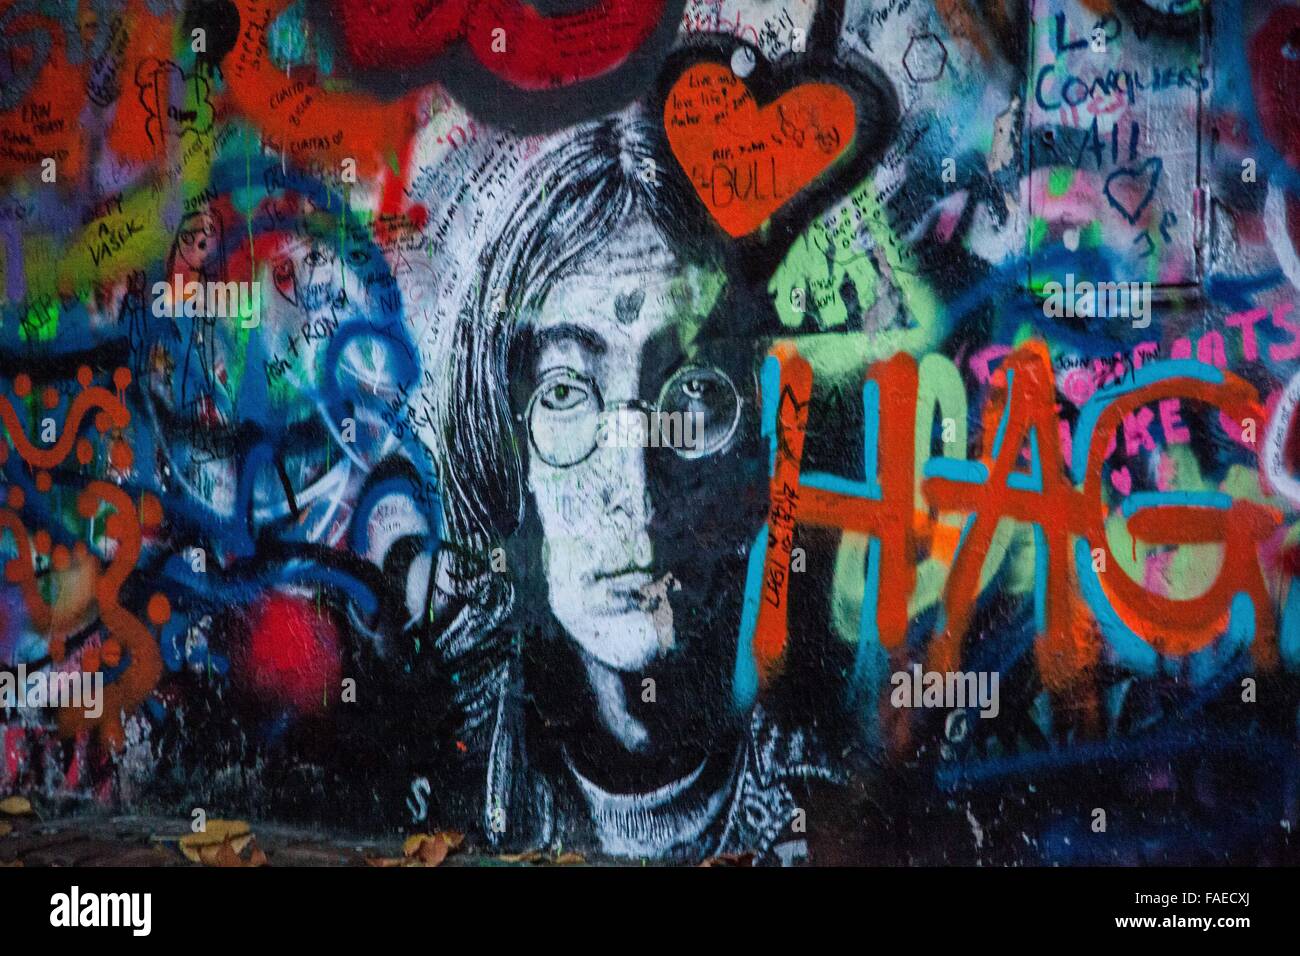 Lennon Wall Prague Czeck Republic, graffiti public art, street mural decorated by local unnamed artist with mirror and paint Stock Photo